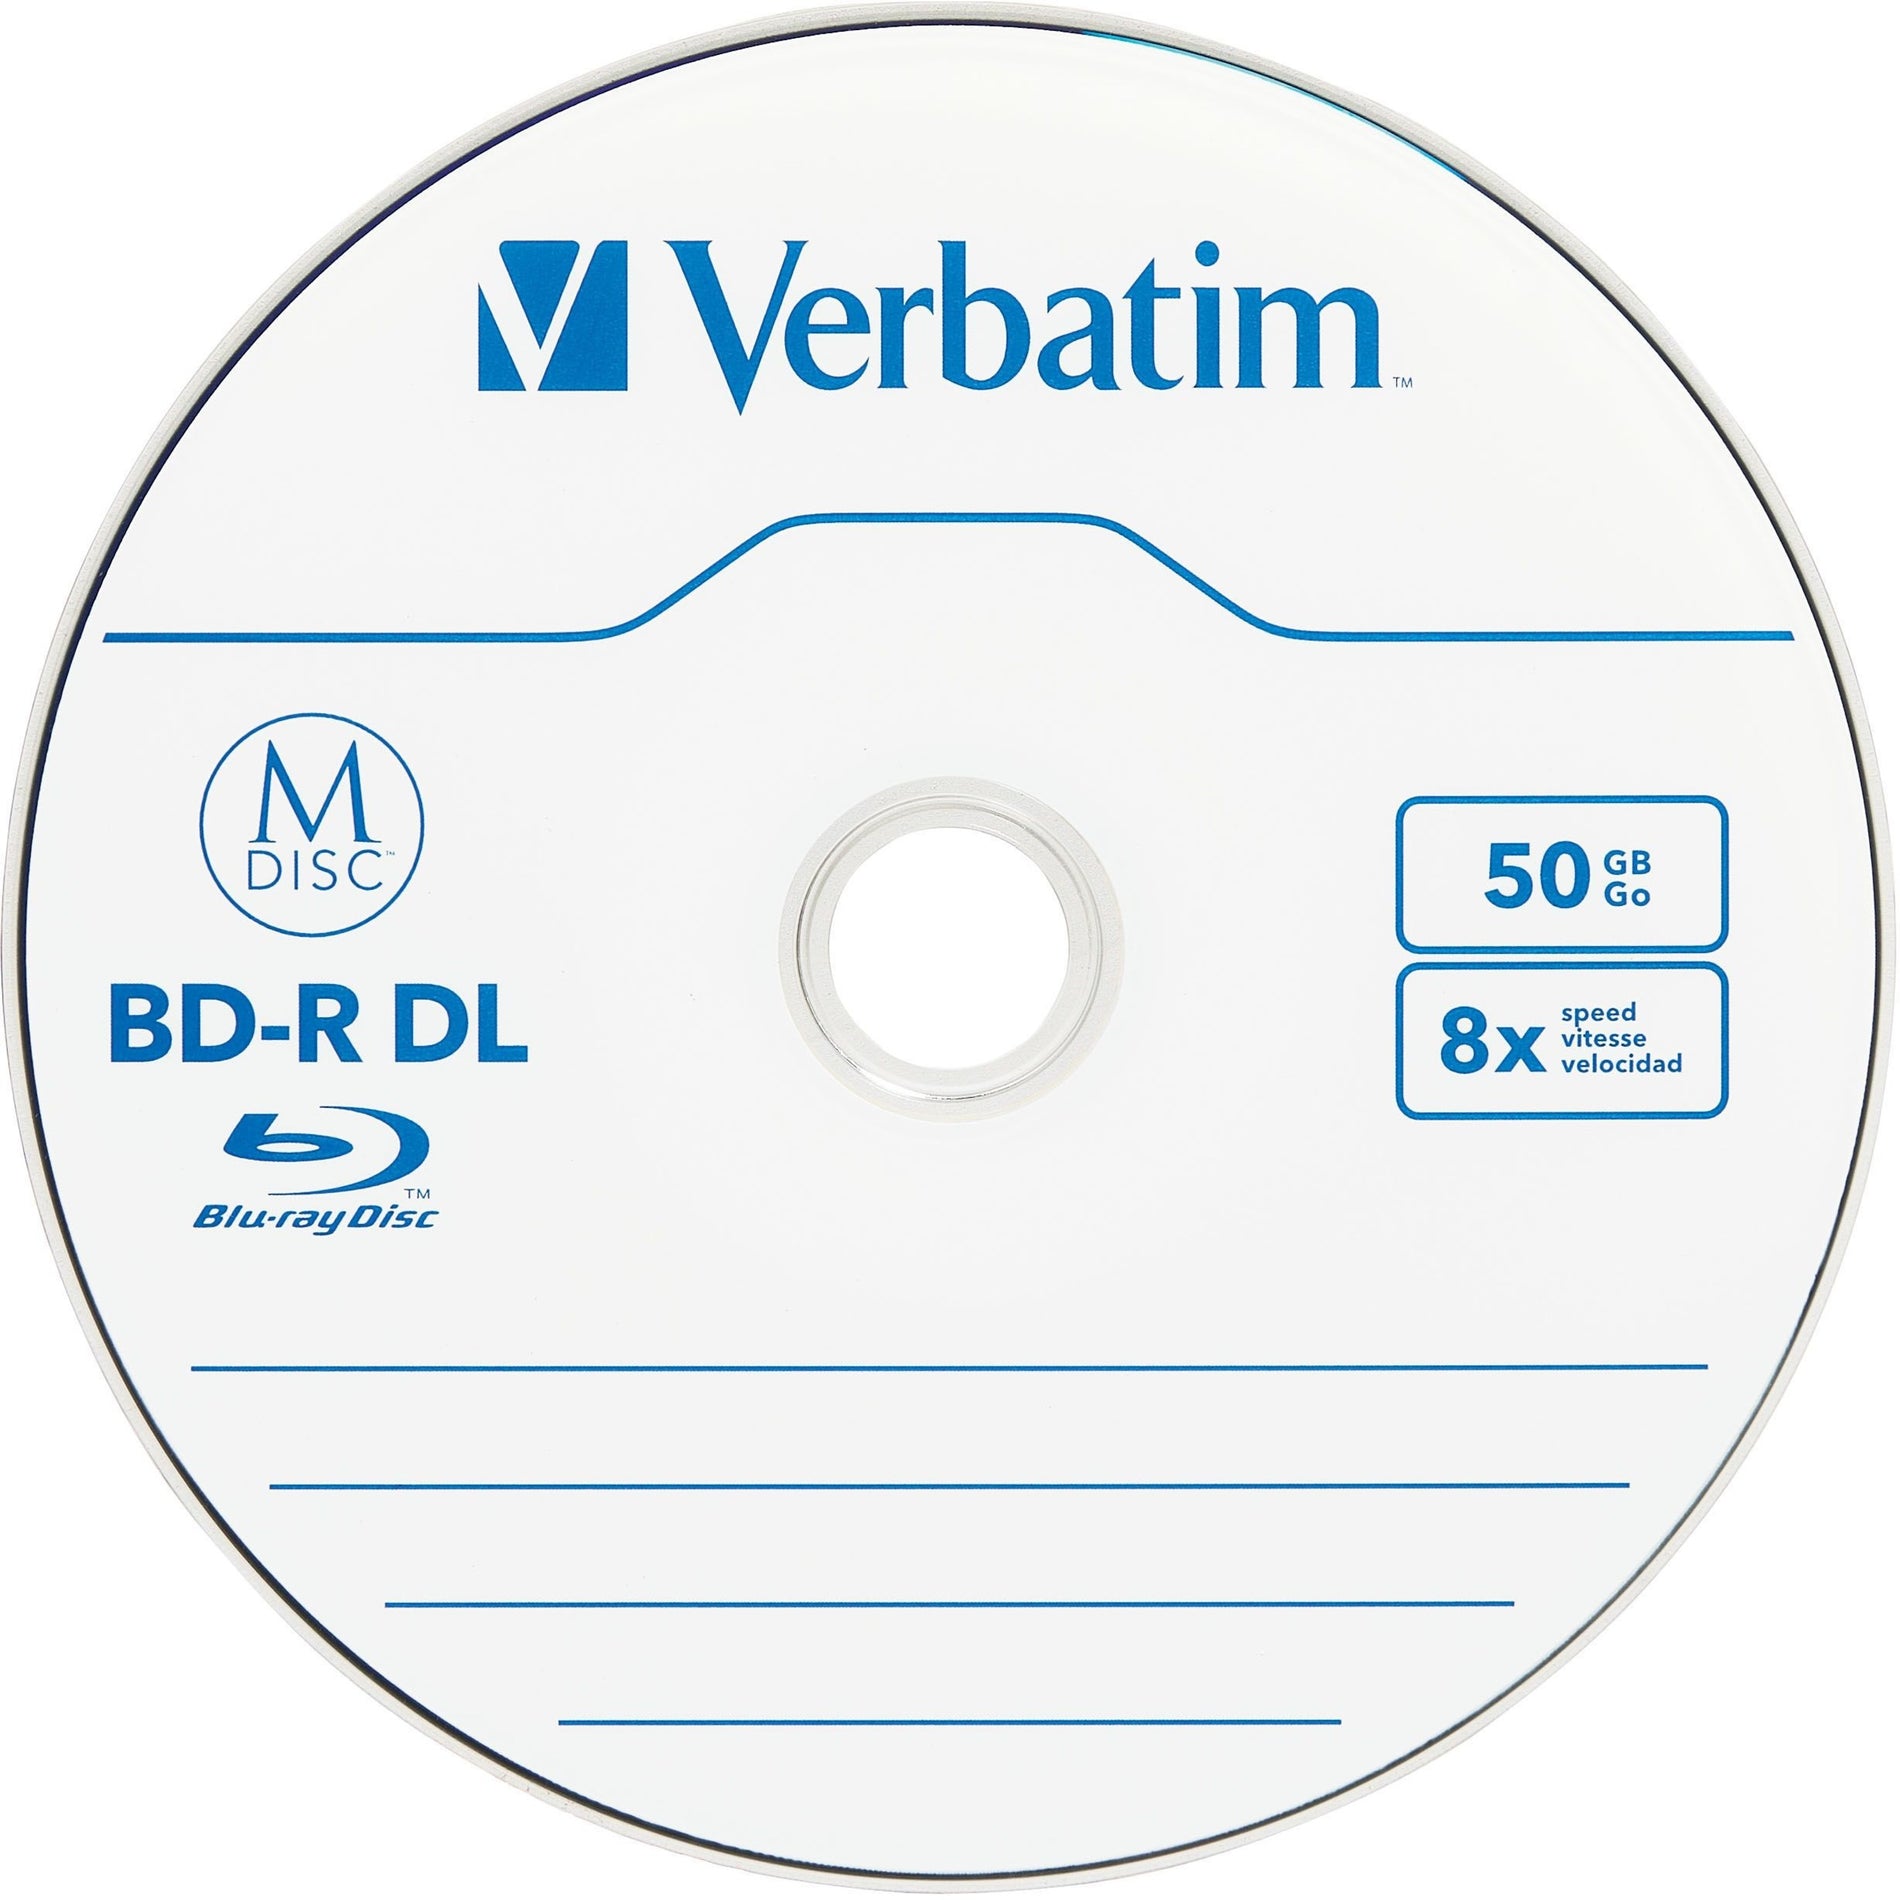 Verbatim 98924 M-Disc BD-R DL 50GB 8X with Branded Surface - 25pk Spindle, 10 Year Warranty, Made in Japan